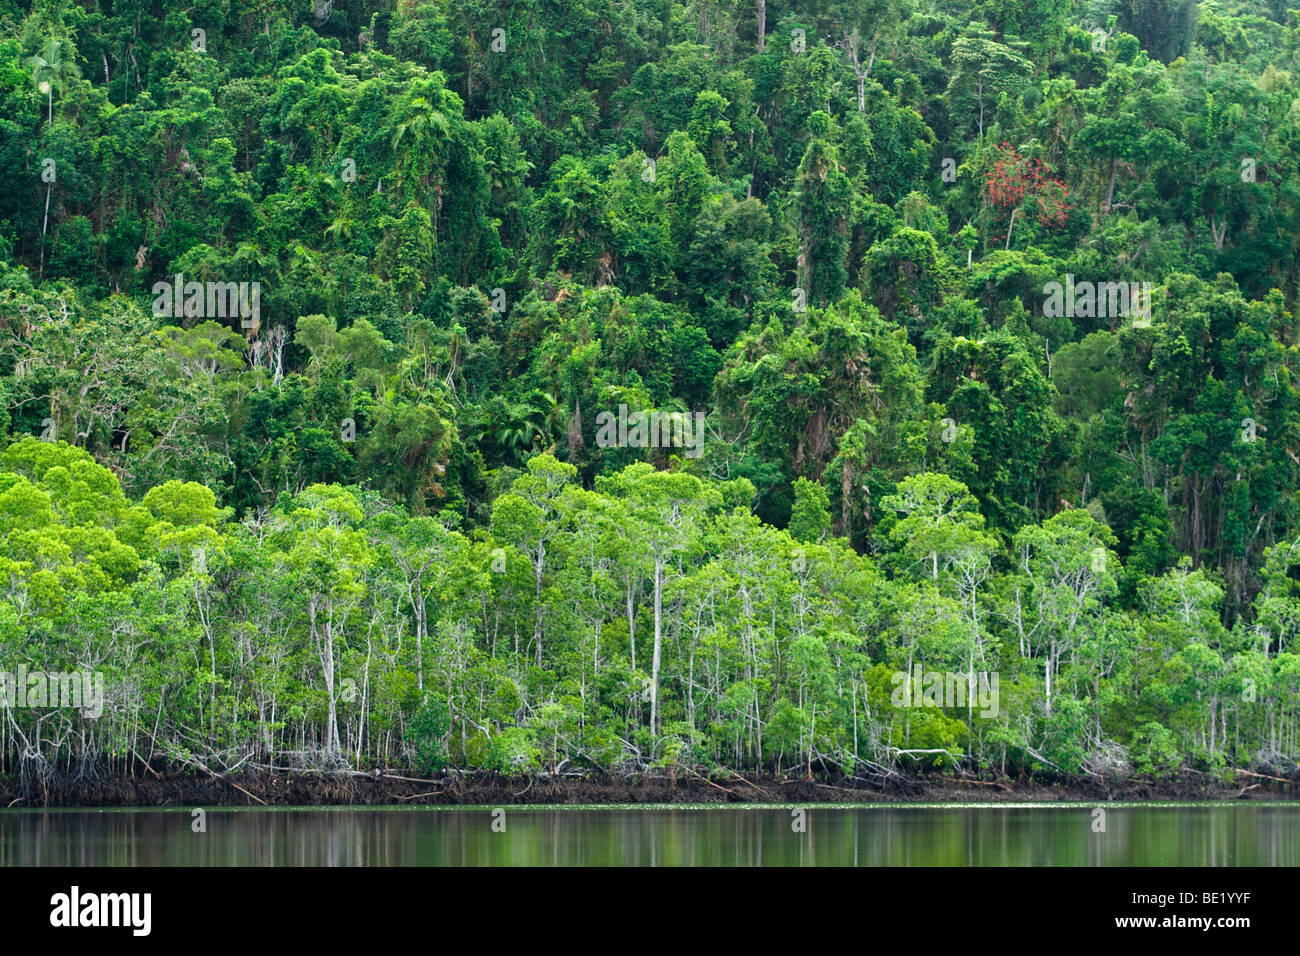 Thick mangroves on the waterways off Cairns, far north Queensland, Australia Stock Photo